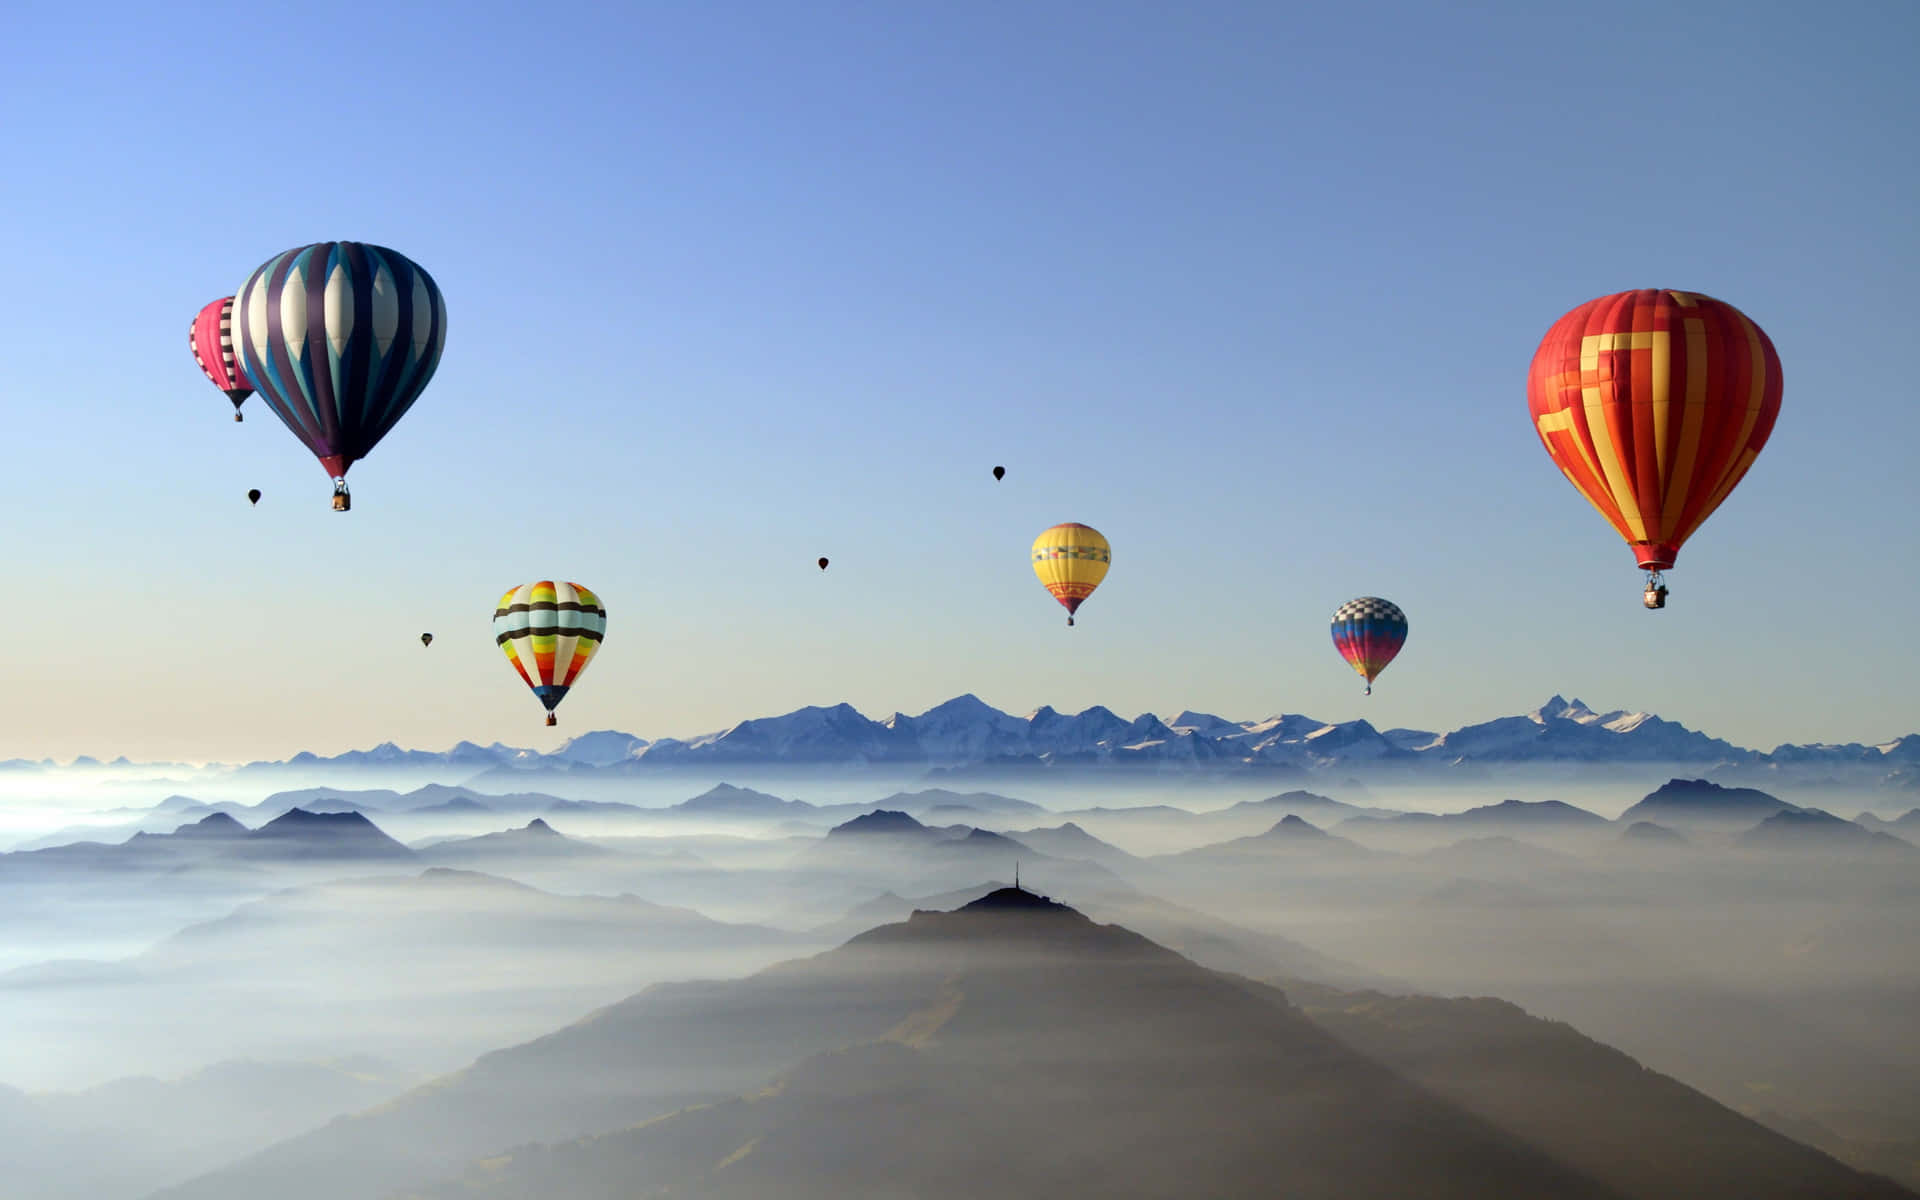 Image  Enjoy the Spectacle of a Colorful Hot Air Balloon Ride